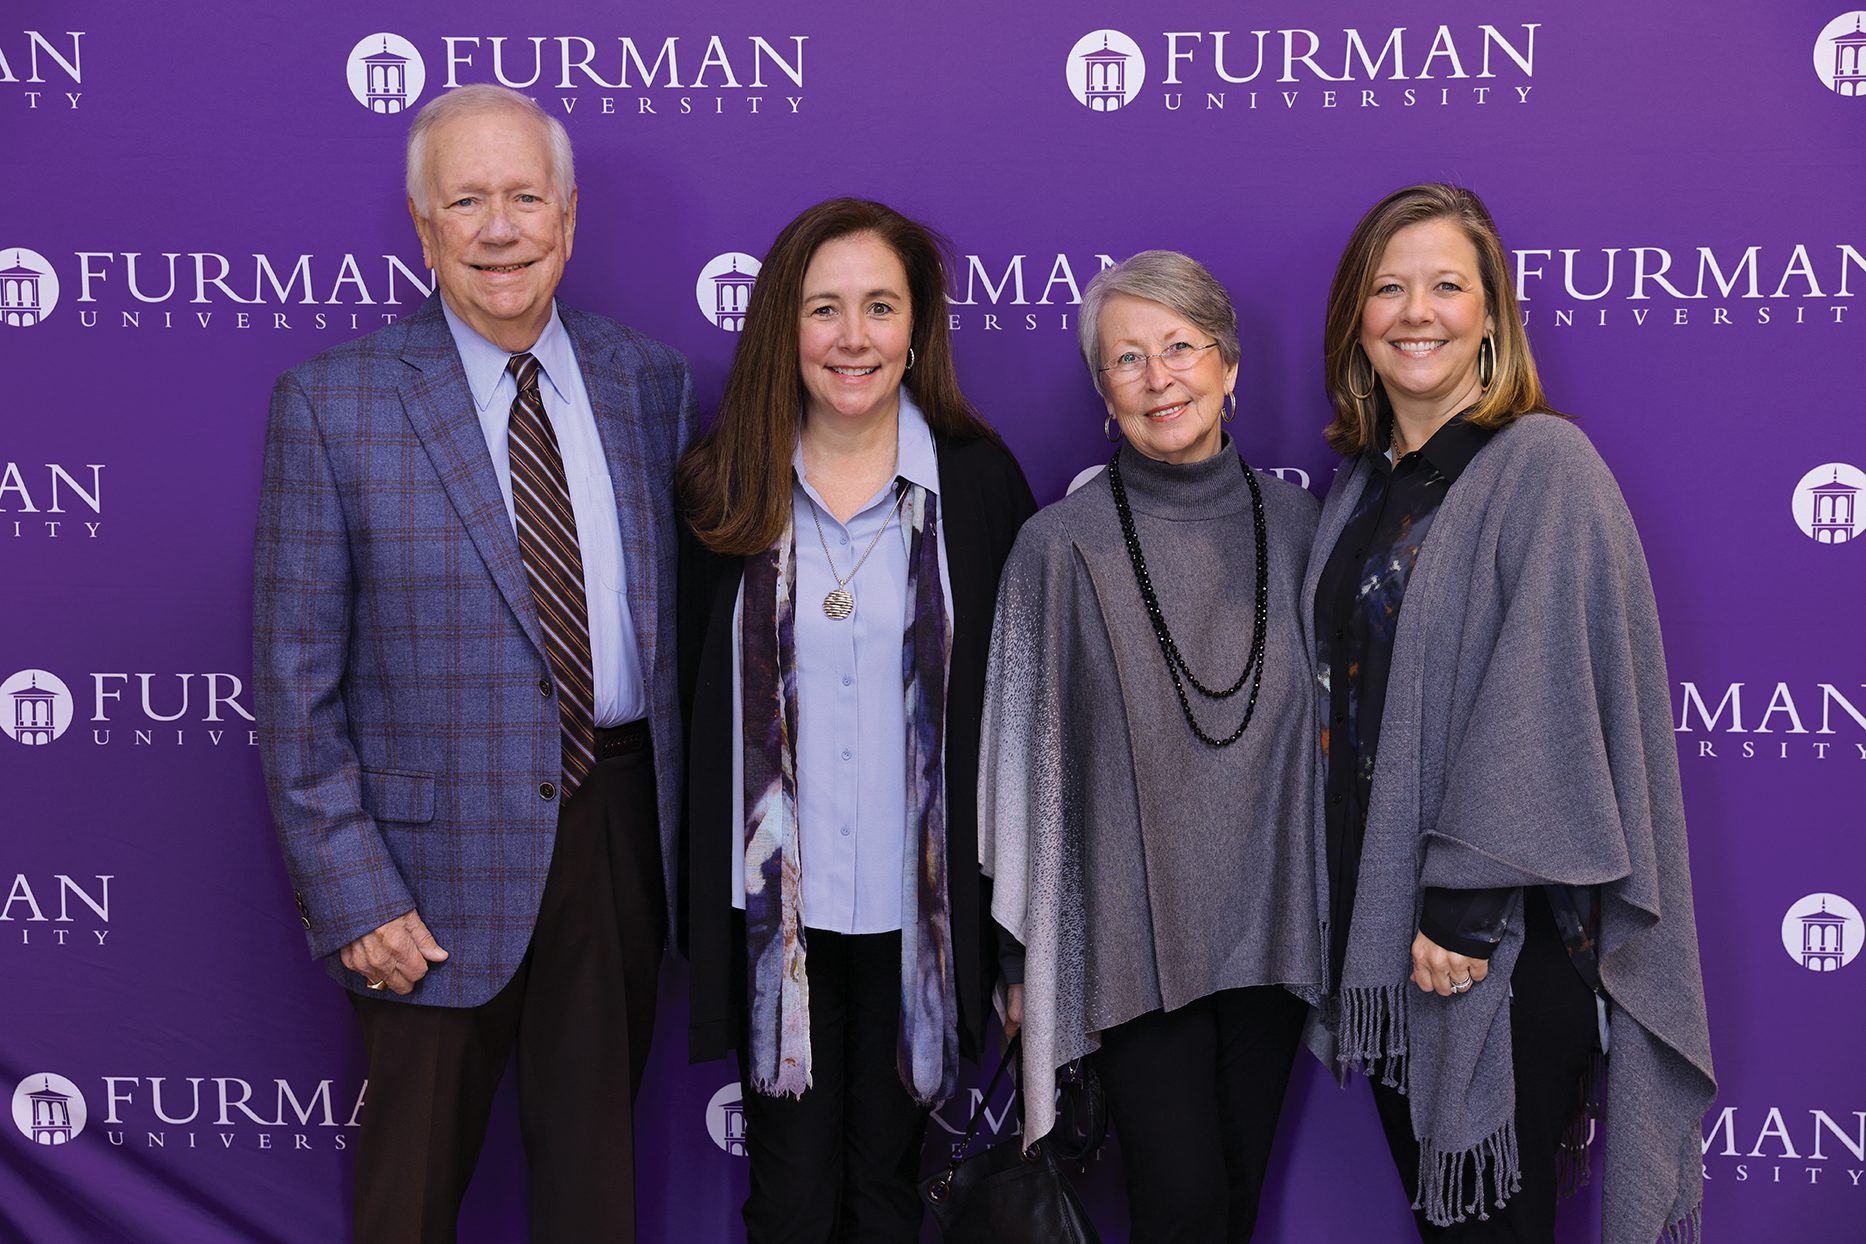 Celebrating the generosity of the Newsom family with their recent induction into the Benefactors Circle. From left: Raymond Newsom ’65, Christi Byron ’91, Carol Newsom ’66 and Julie Means.